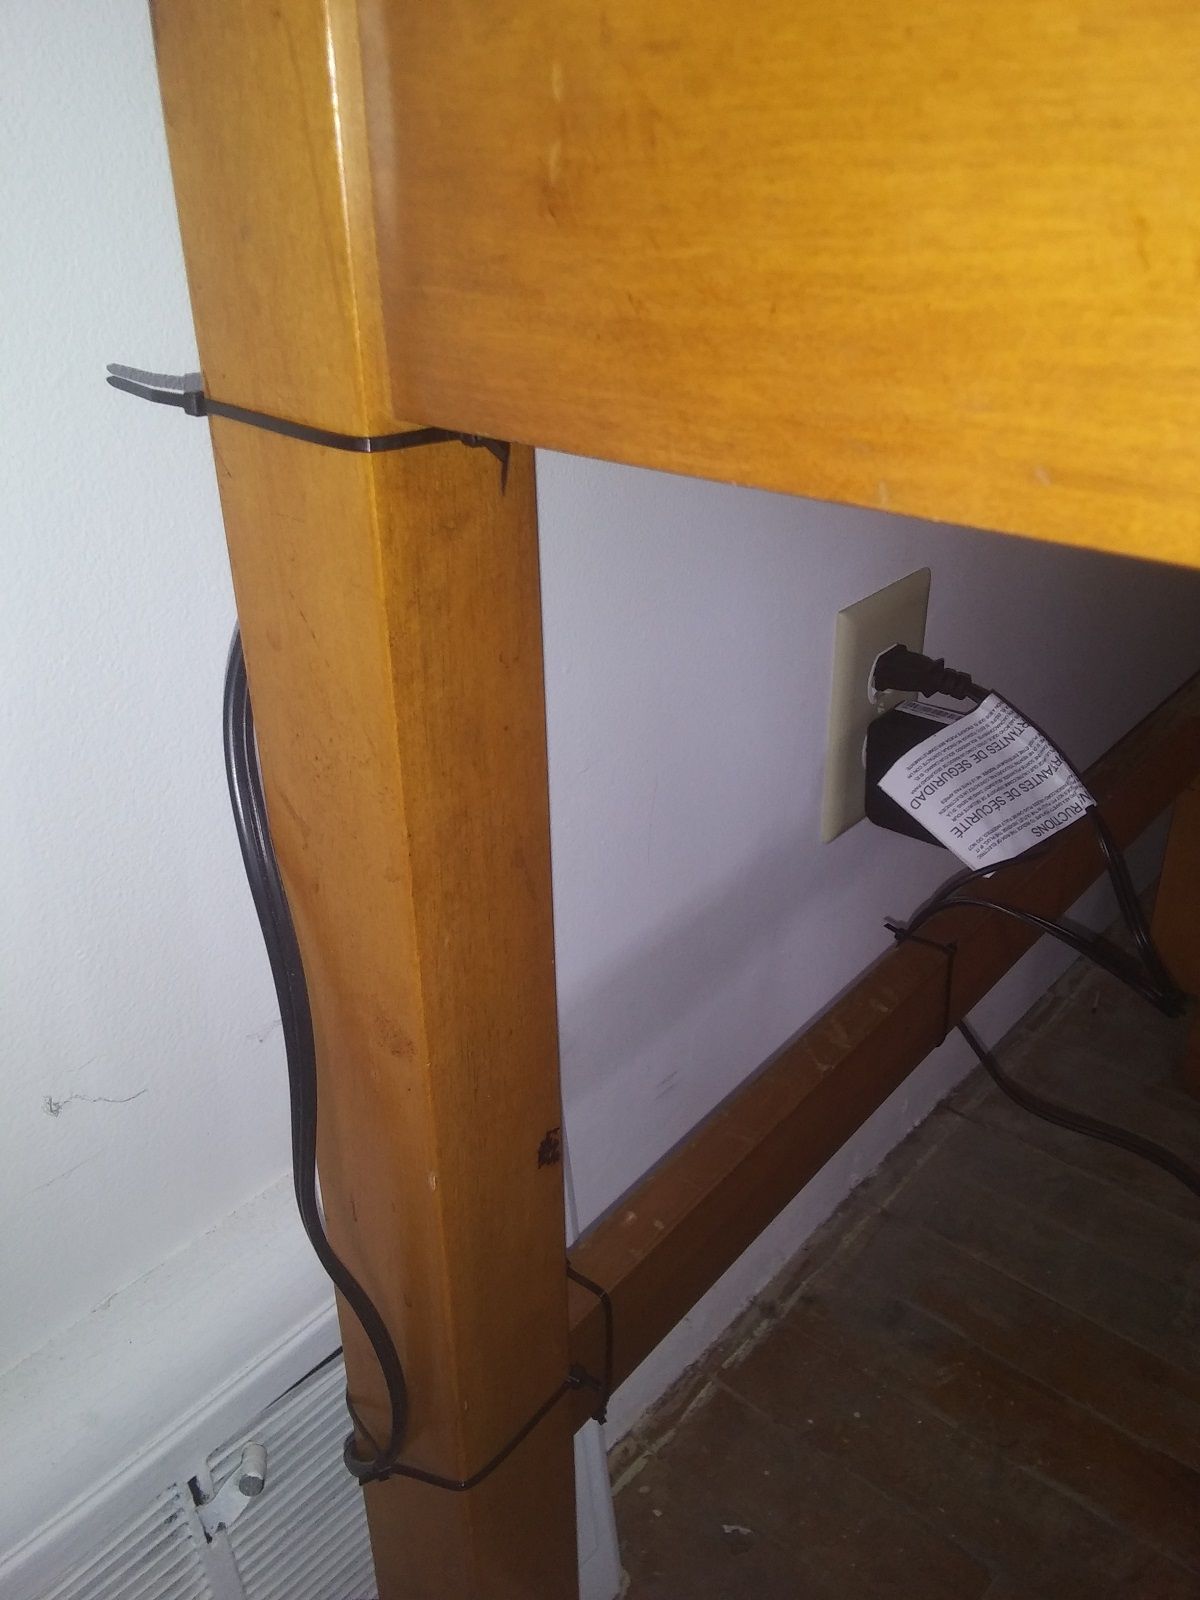 Zipties routing cable along a desk